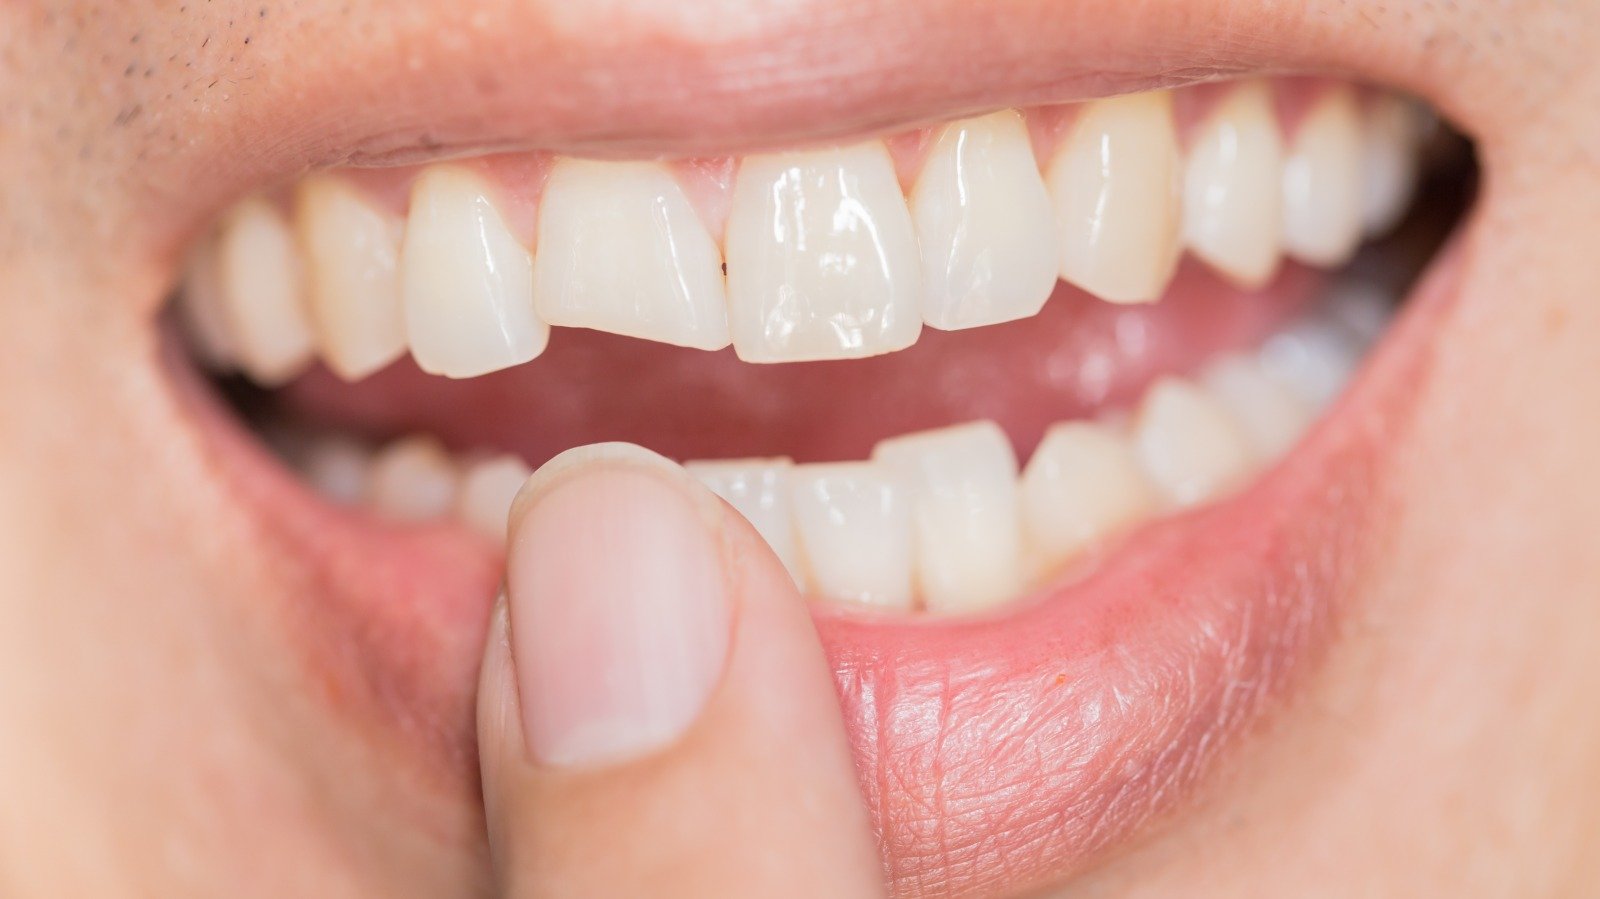 More People Are Having Cracked Teeth Right Now: Here's Why